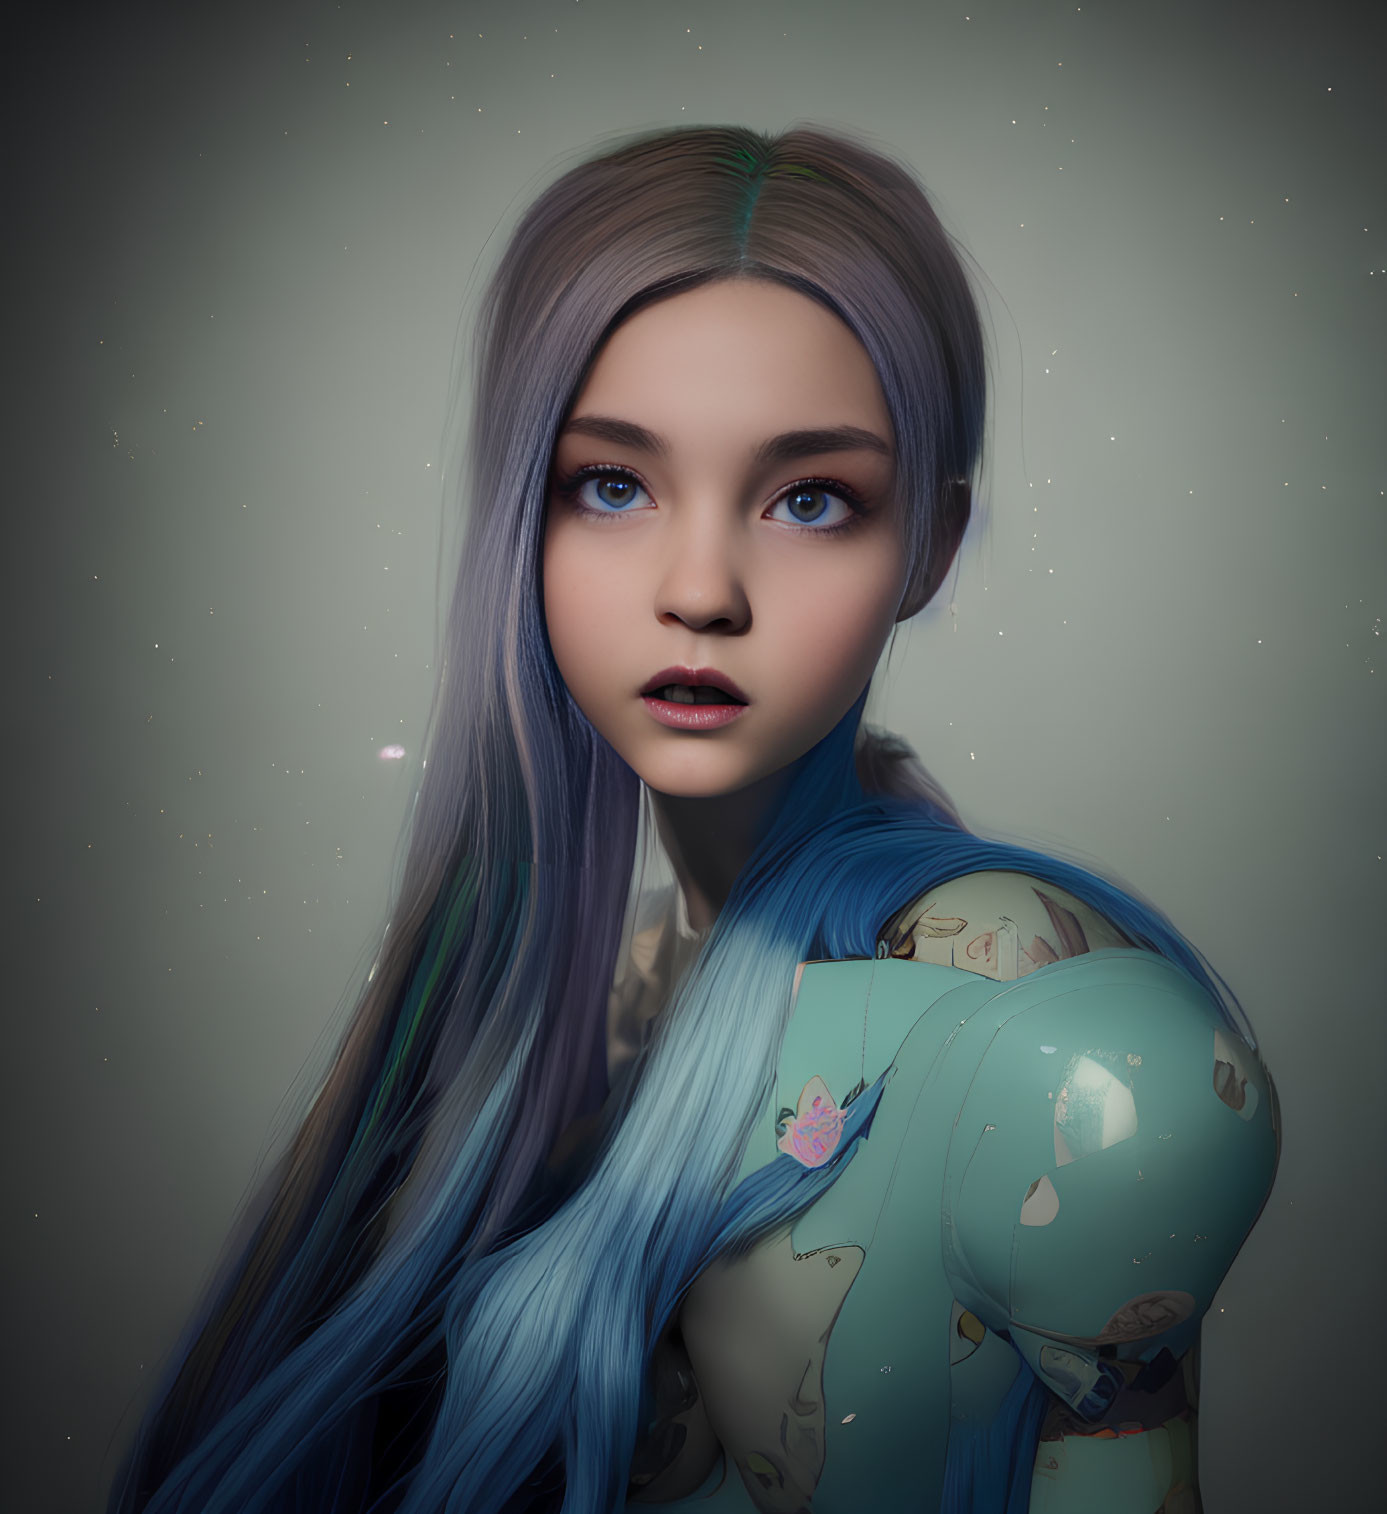 Digital Artwork: Young Woman with Blue-Gradient Hair and Green Suit with Butterfly Illustrations